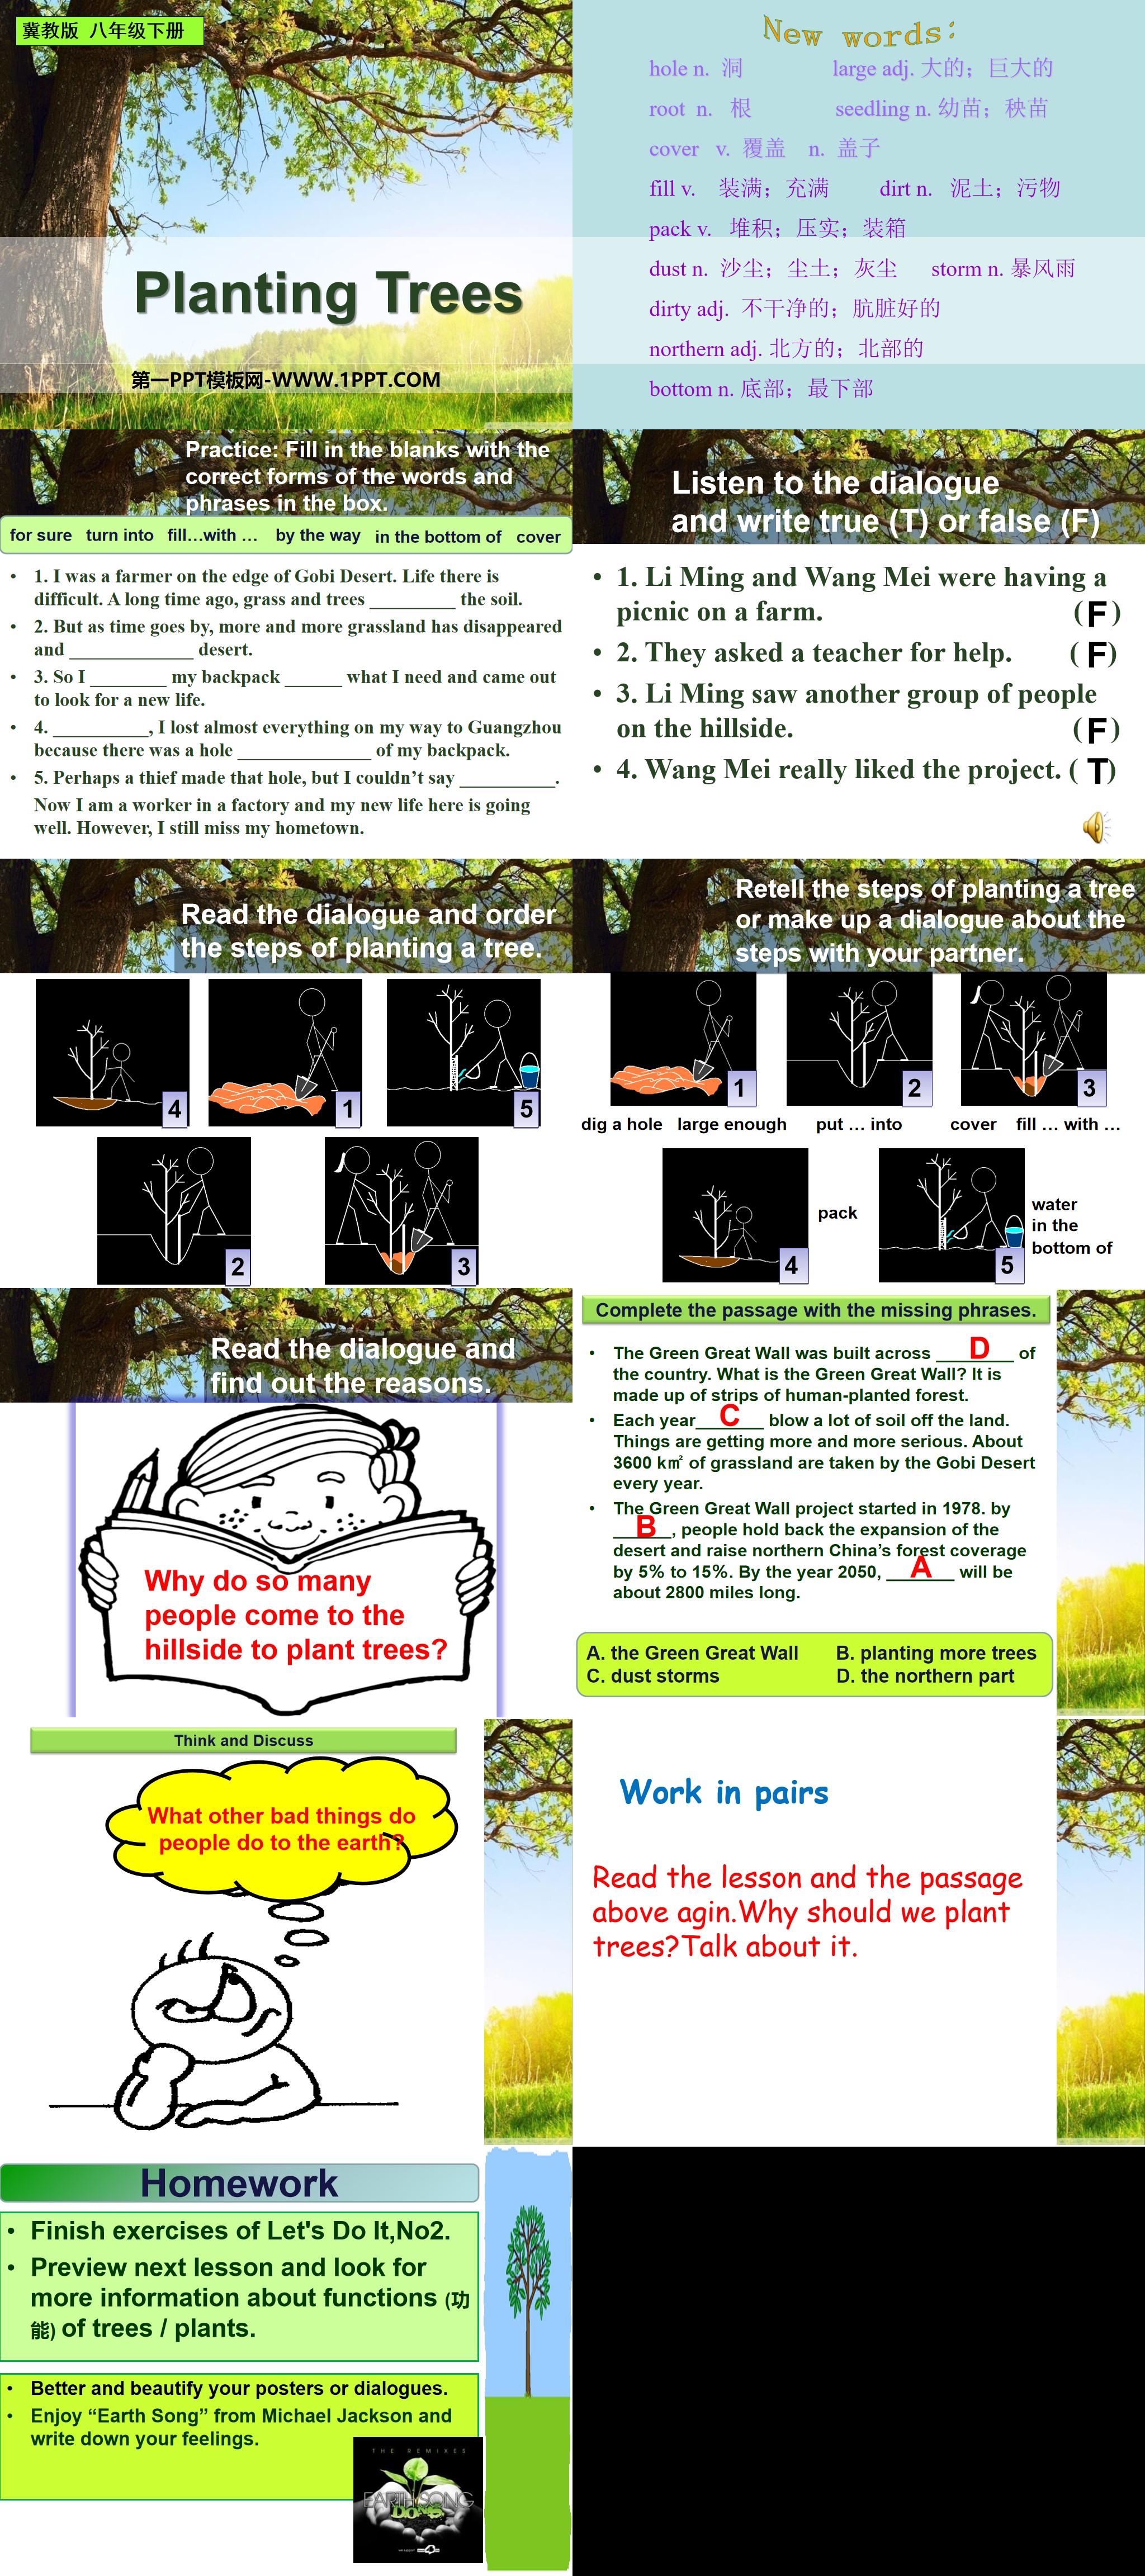 《Planting Trees》Plant a Plant PPT
（2）